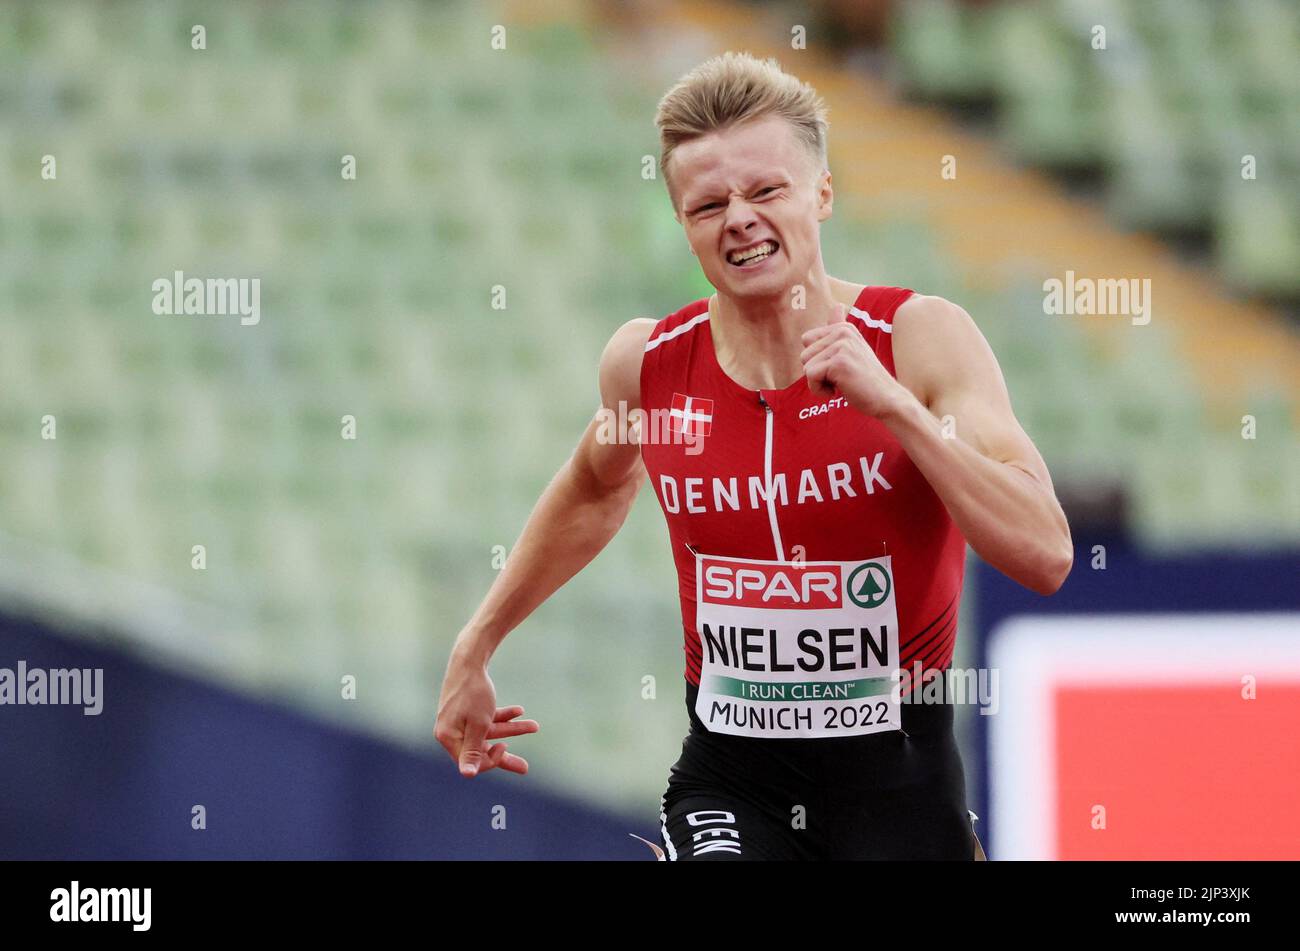 Athletics - 2022 European Championships - Olympiastadion, Munich, Germany - August 15, 2022 Denmark's Gustav Lundholm Nielsen in action during the Men's 400m Round 1 Heat 4 REUTERS/Wolfgang Rattay Stock Photo